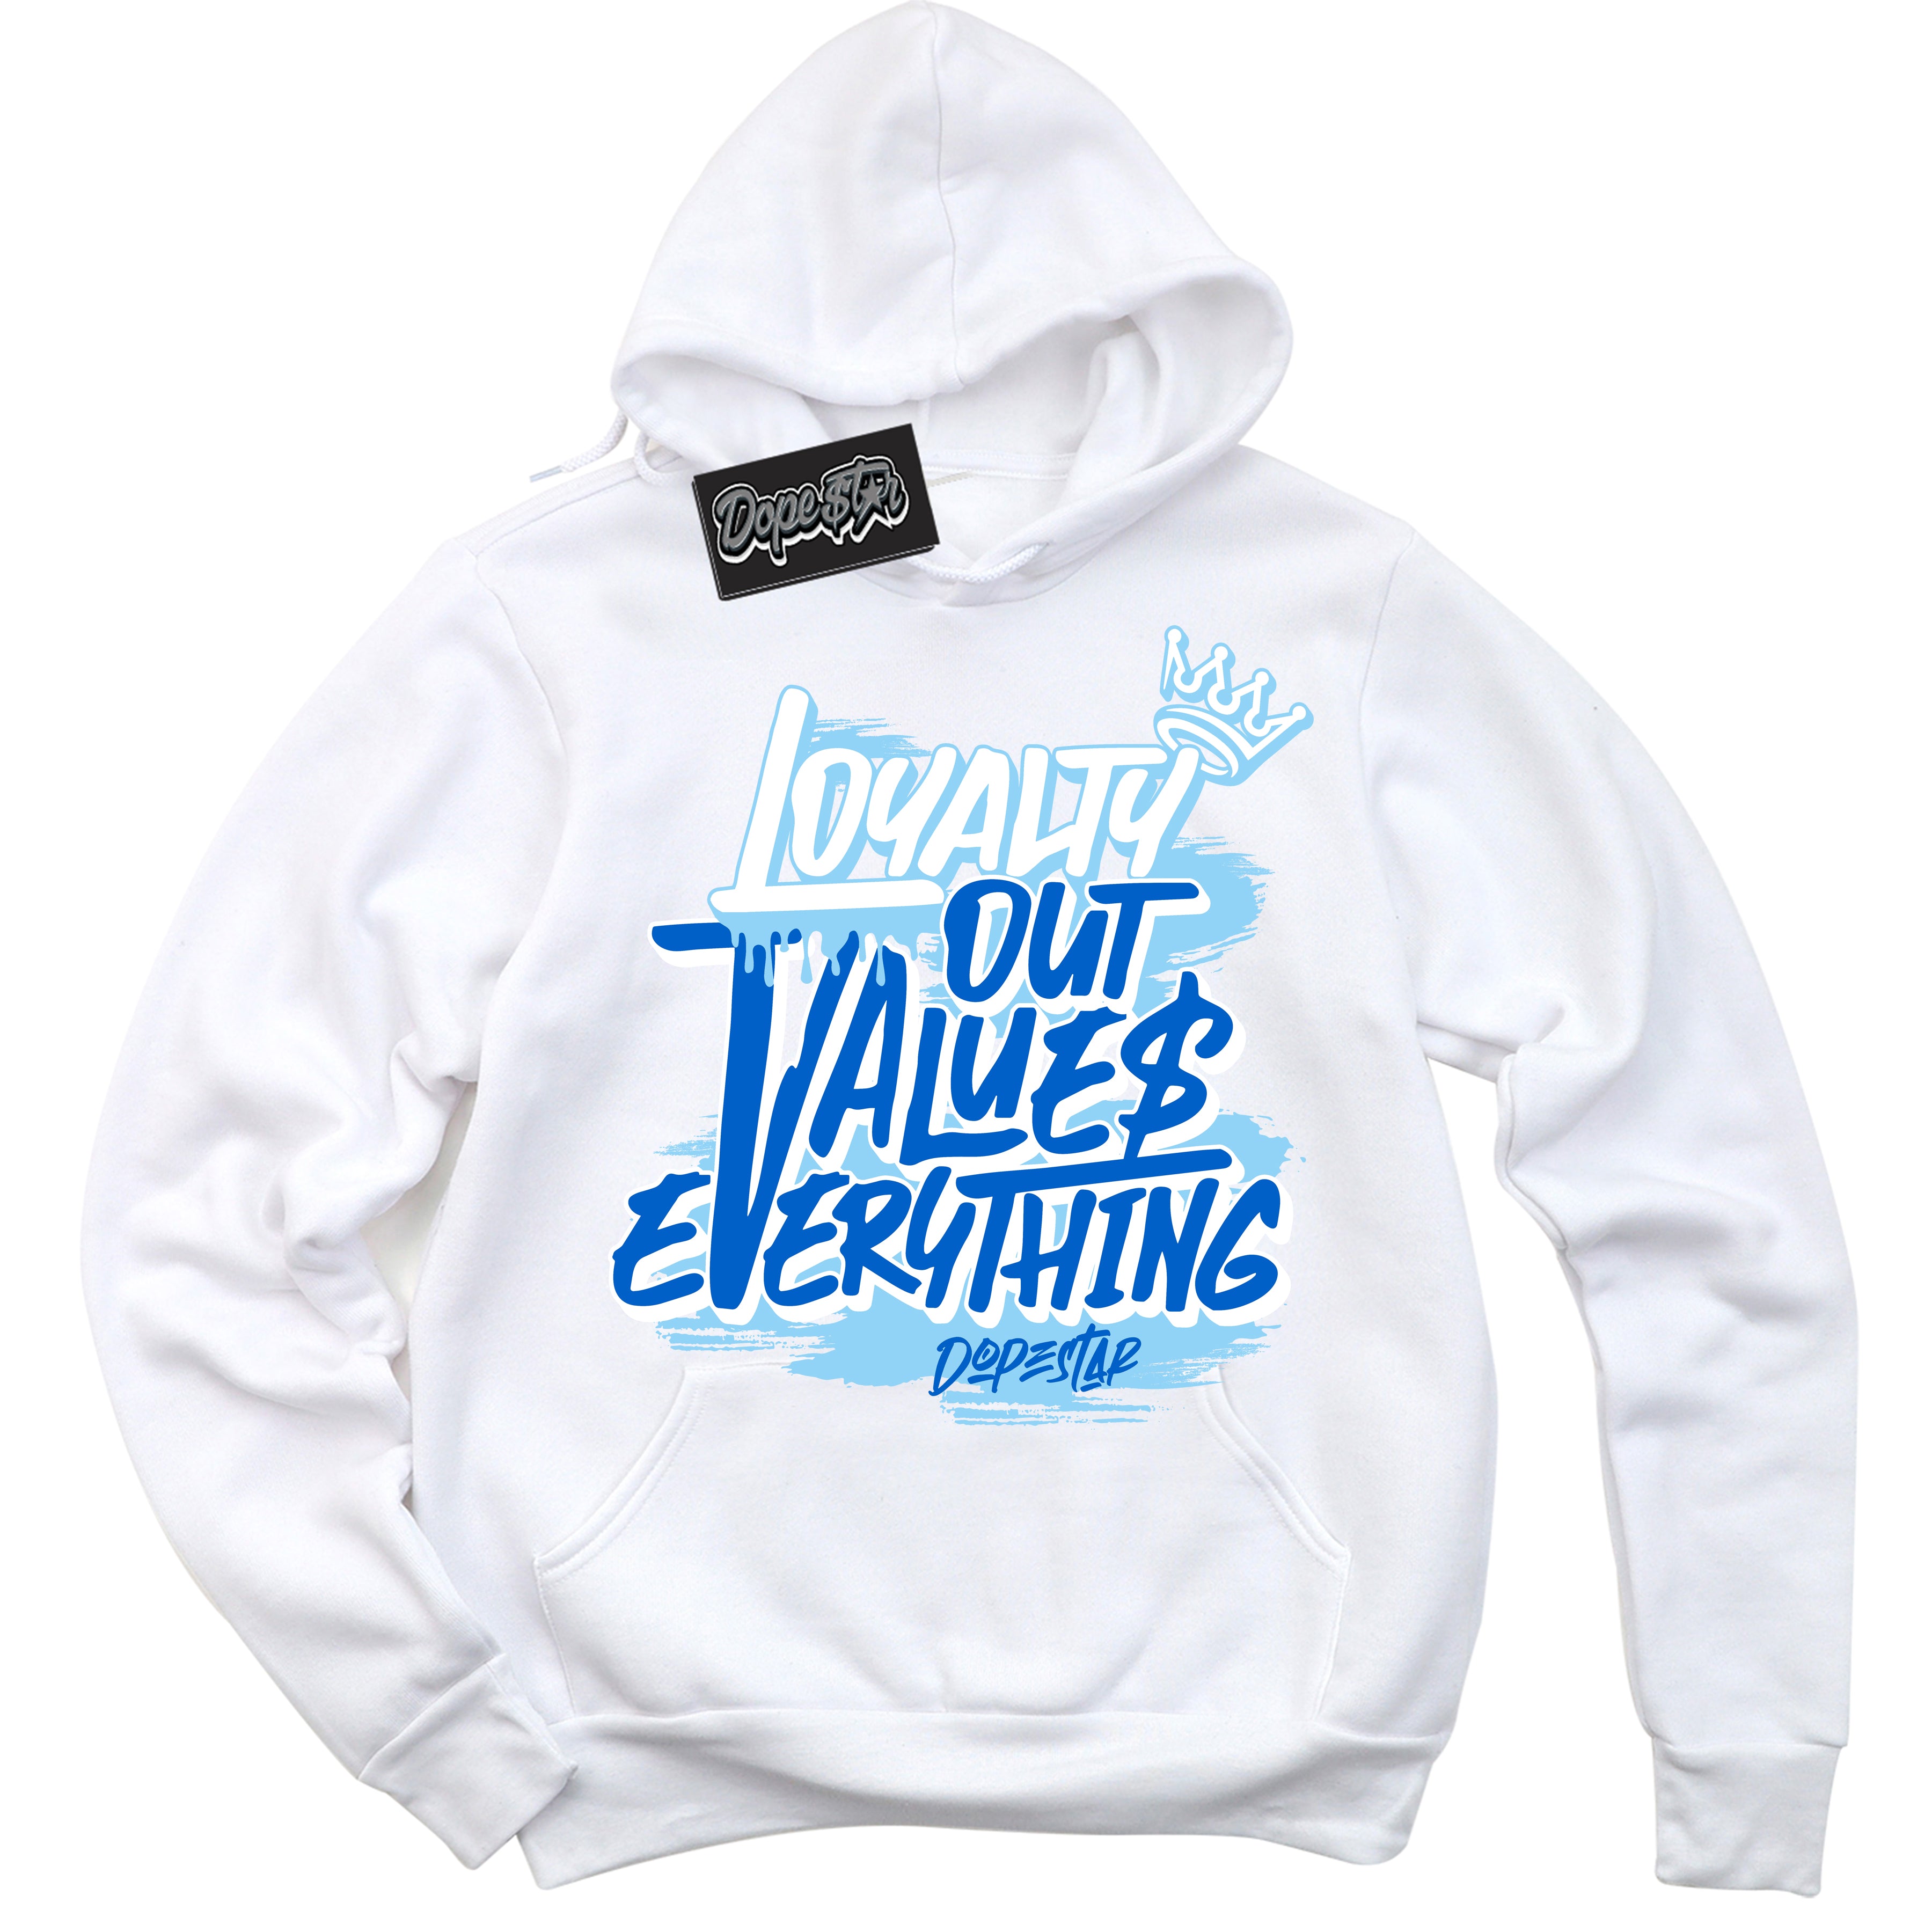 Cool White Hoodie with “ Loyalty Out Values Everything ”  design that Perfectly Matches Argon Sneakers.